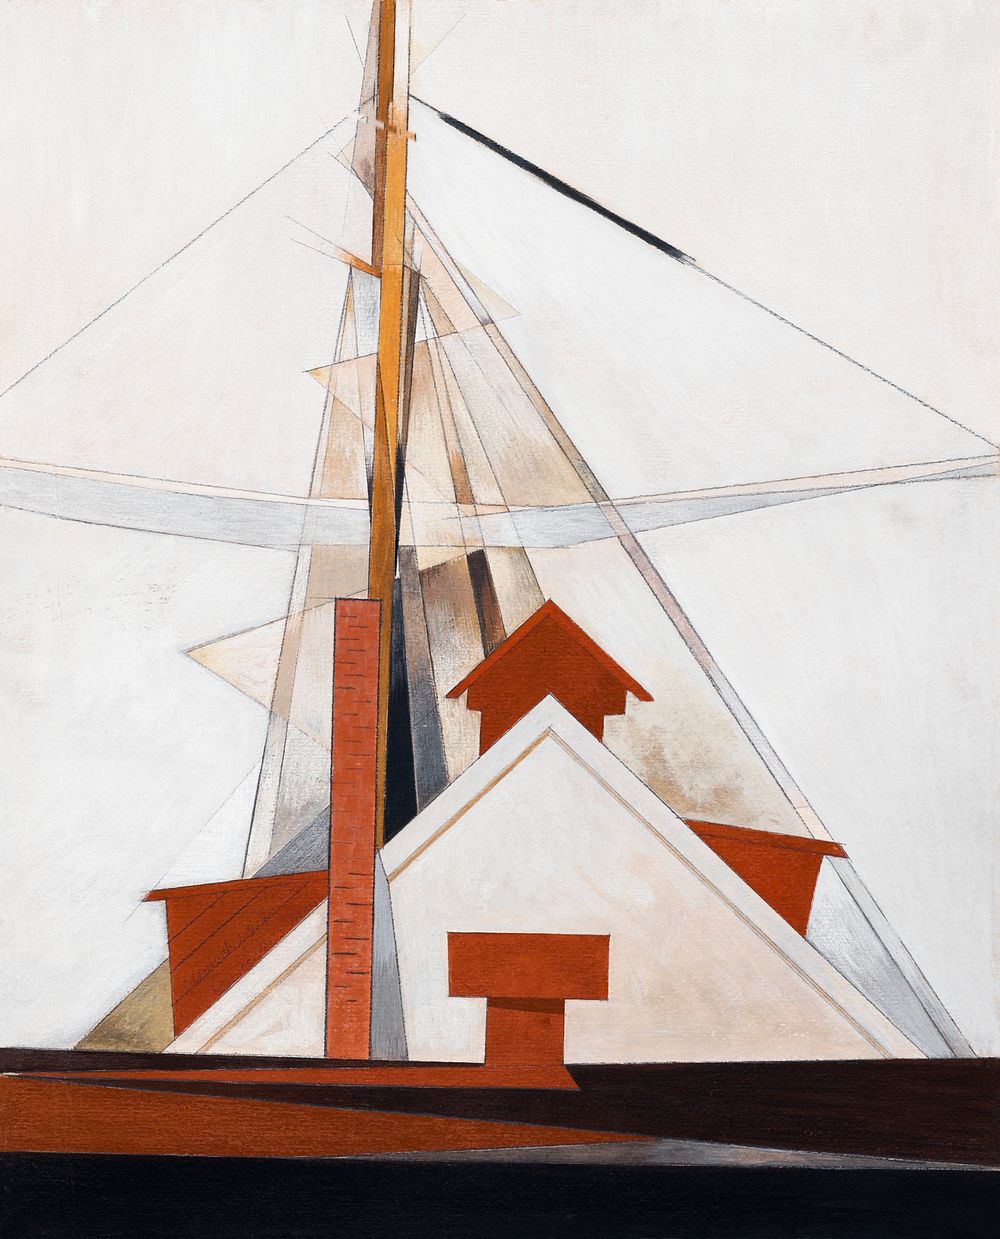 Masts (1919) painting in high resolution by Charles Demuth. Original from The Barnes Foundation. Digitally enhanced by…